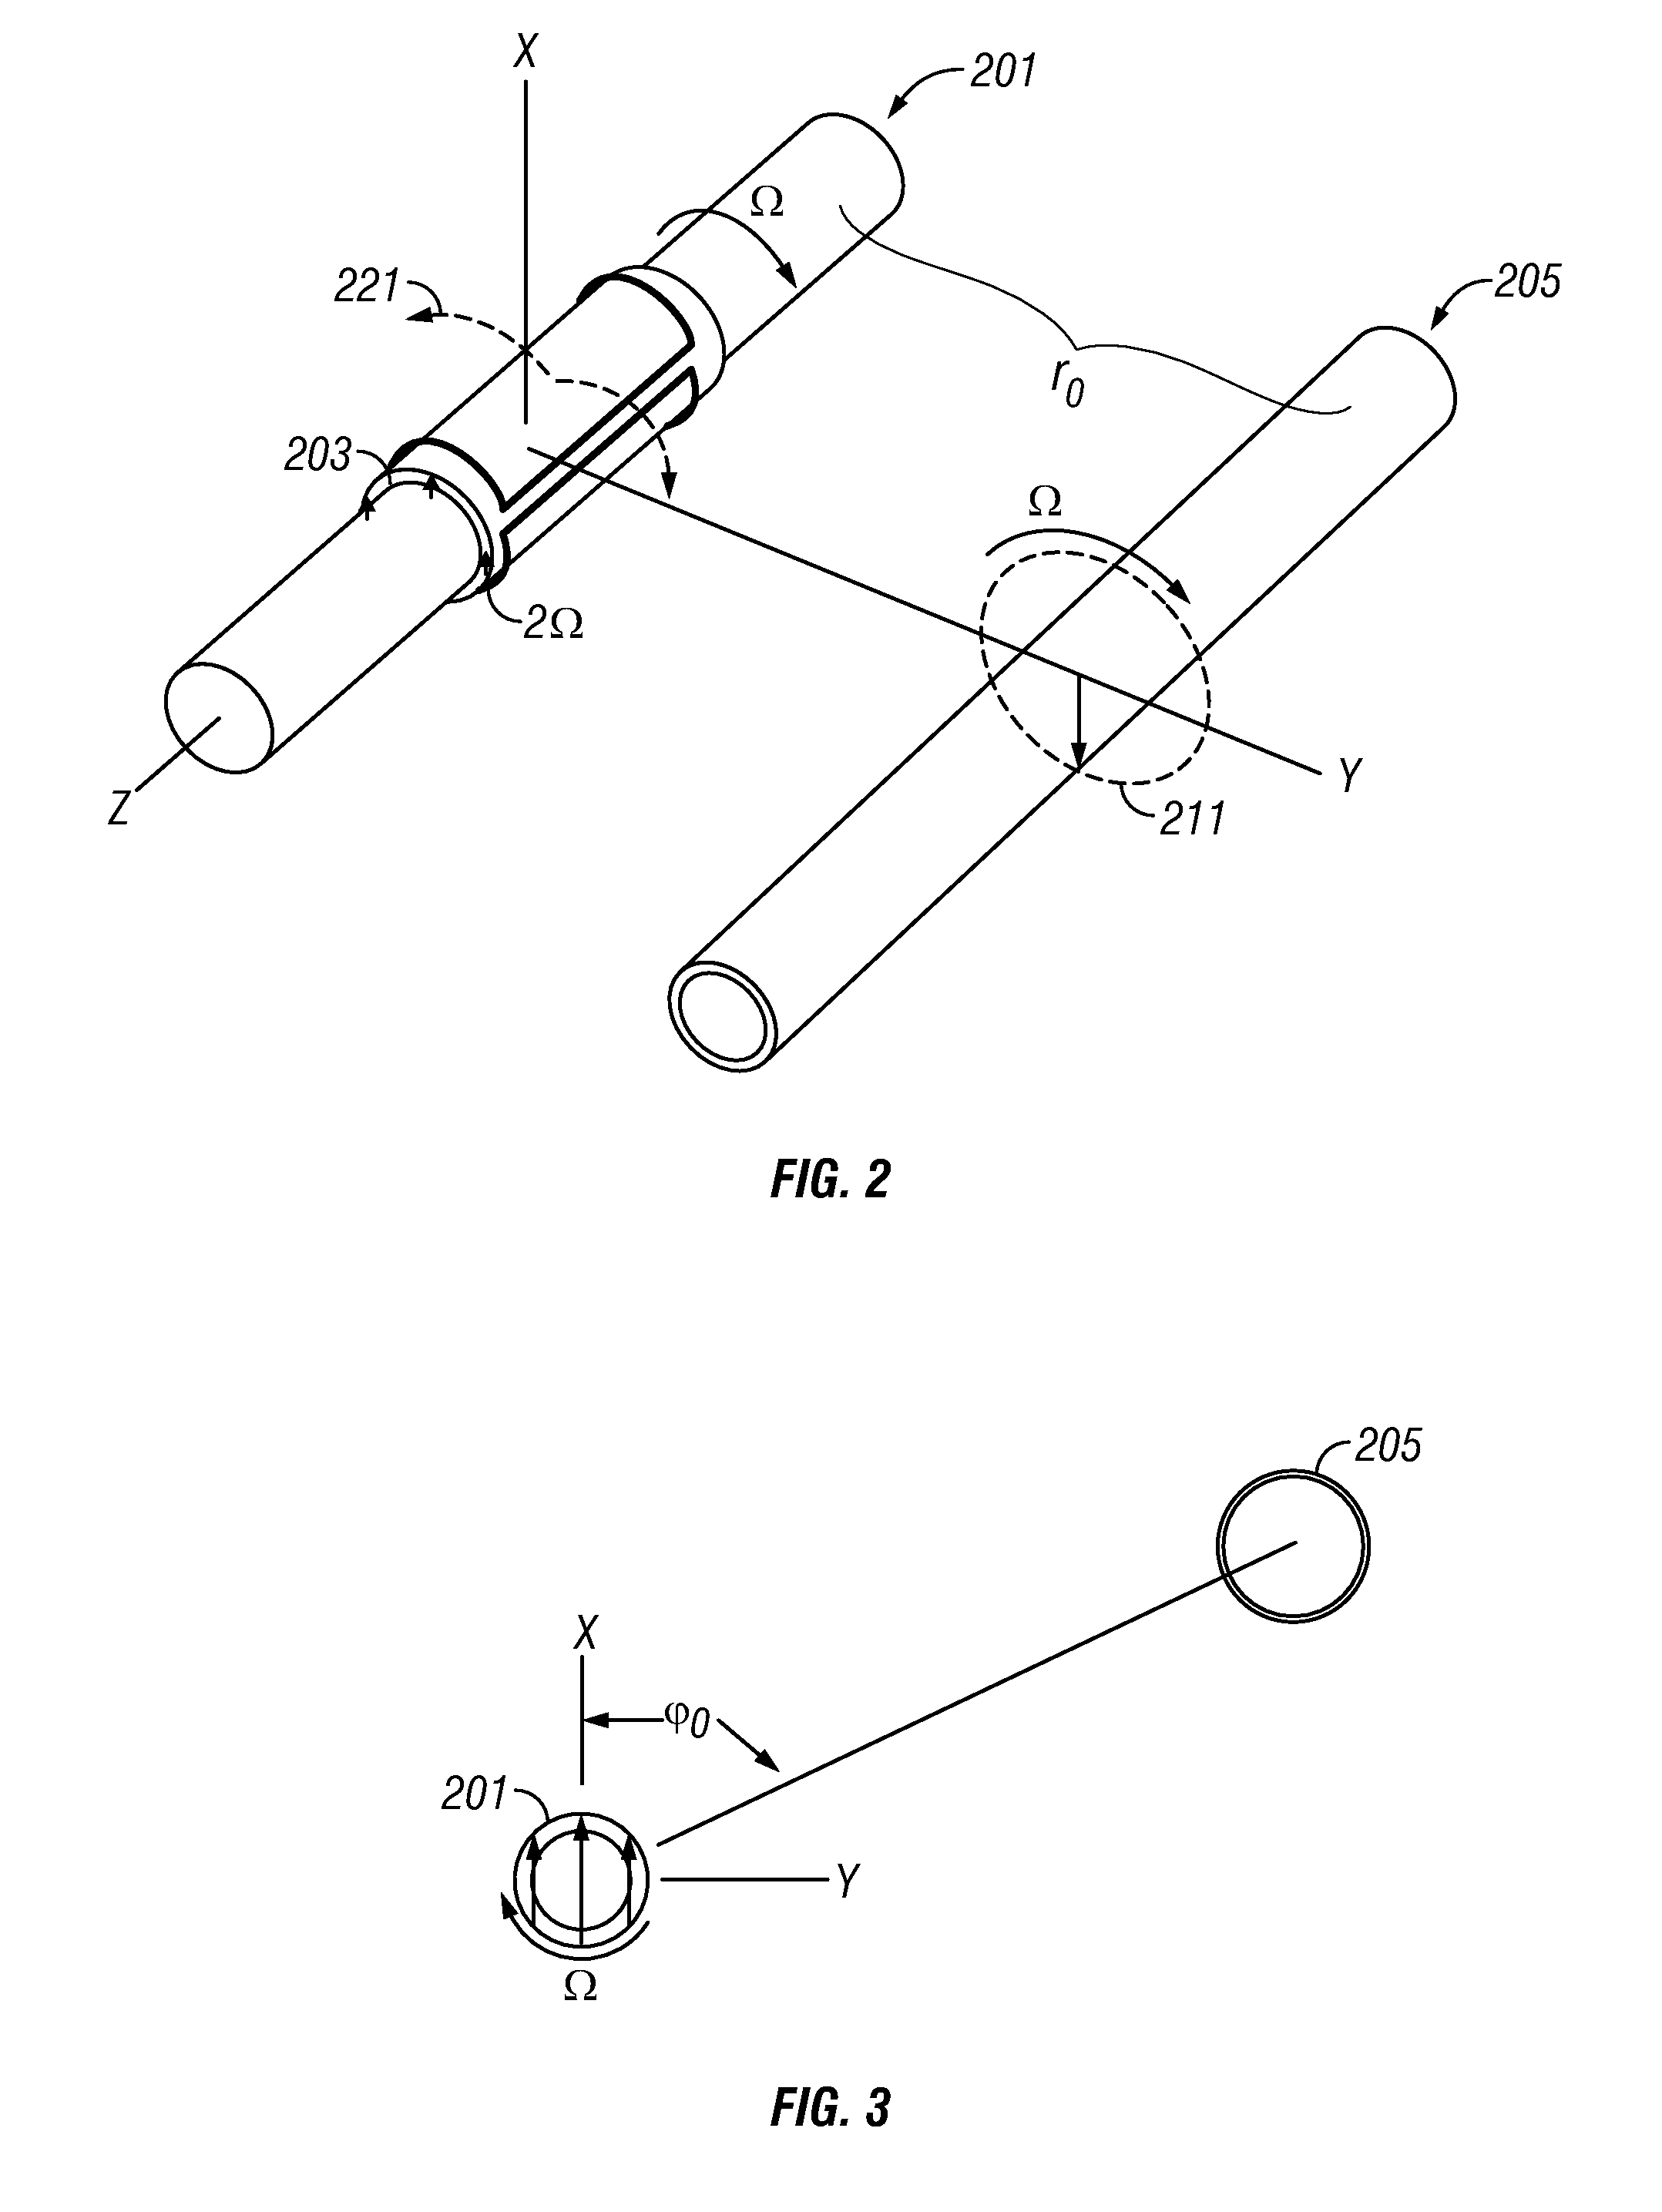 Method and Apparatus for Well-bore Proximity Measurement While Drilling